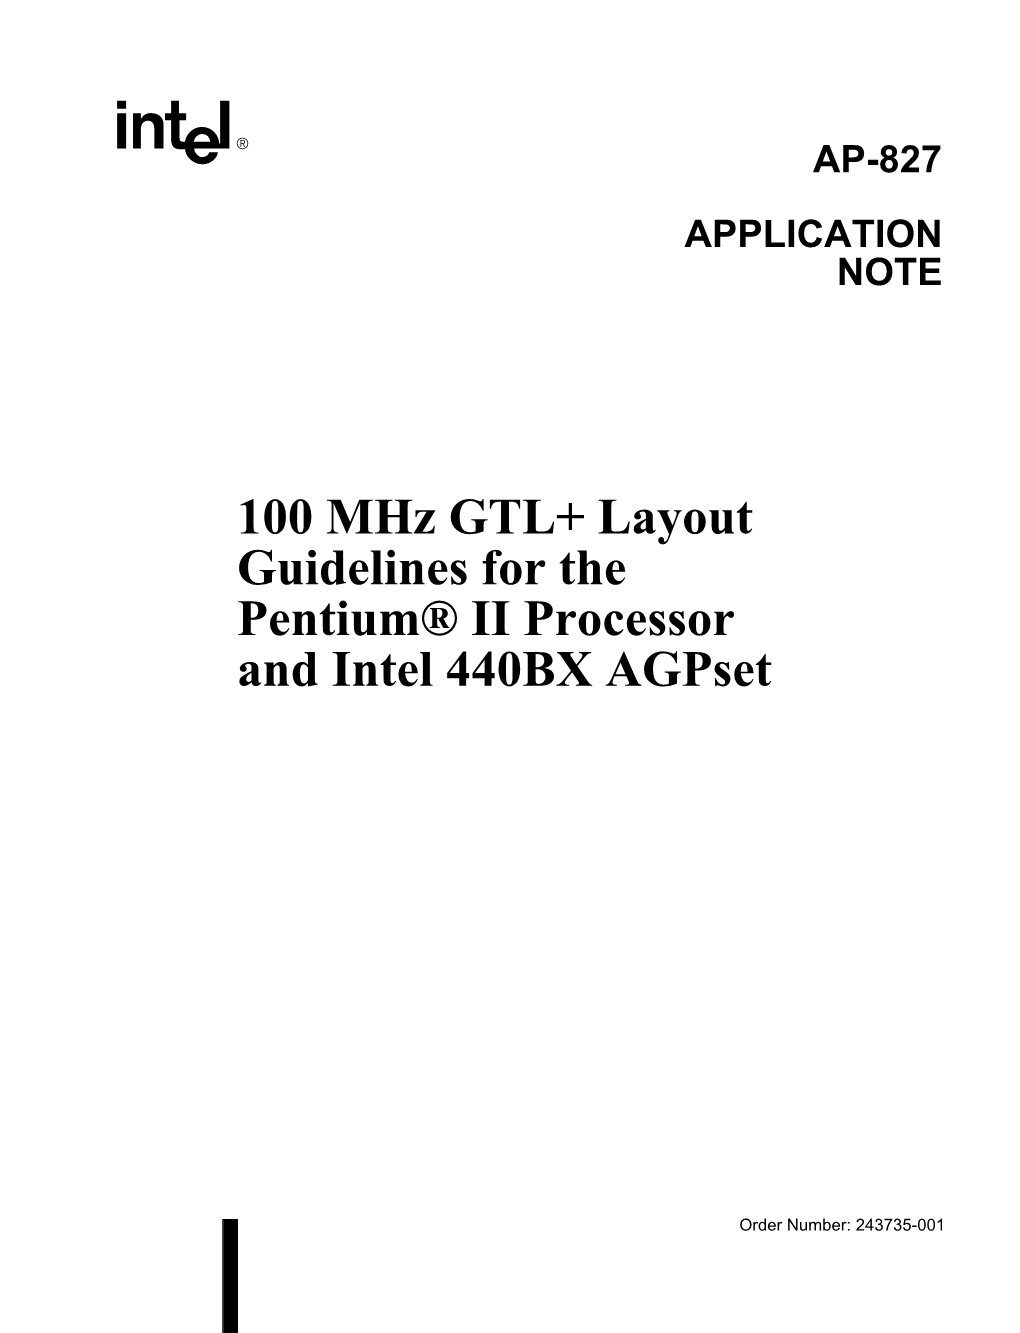 100 Mhz GTL+ Layout Guidelines for the Pentium® II Processor and Intel 440BX Agpset